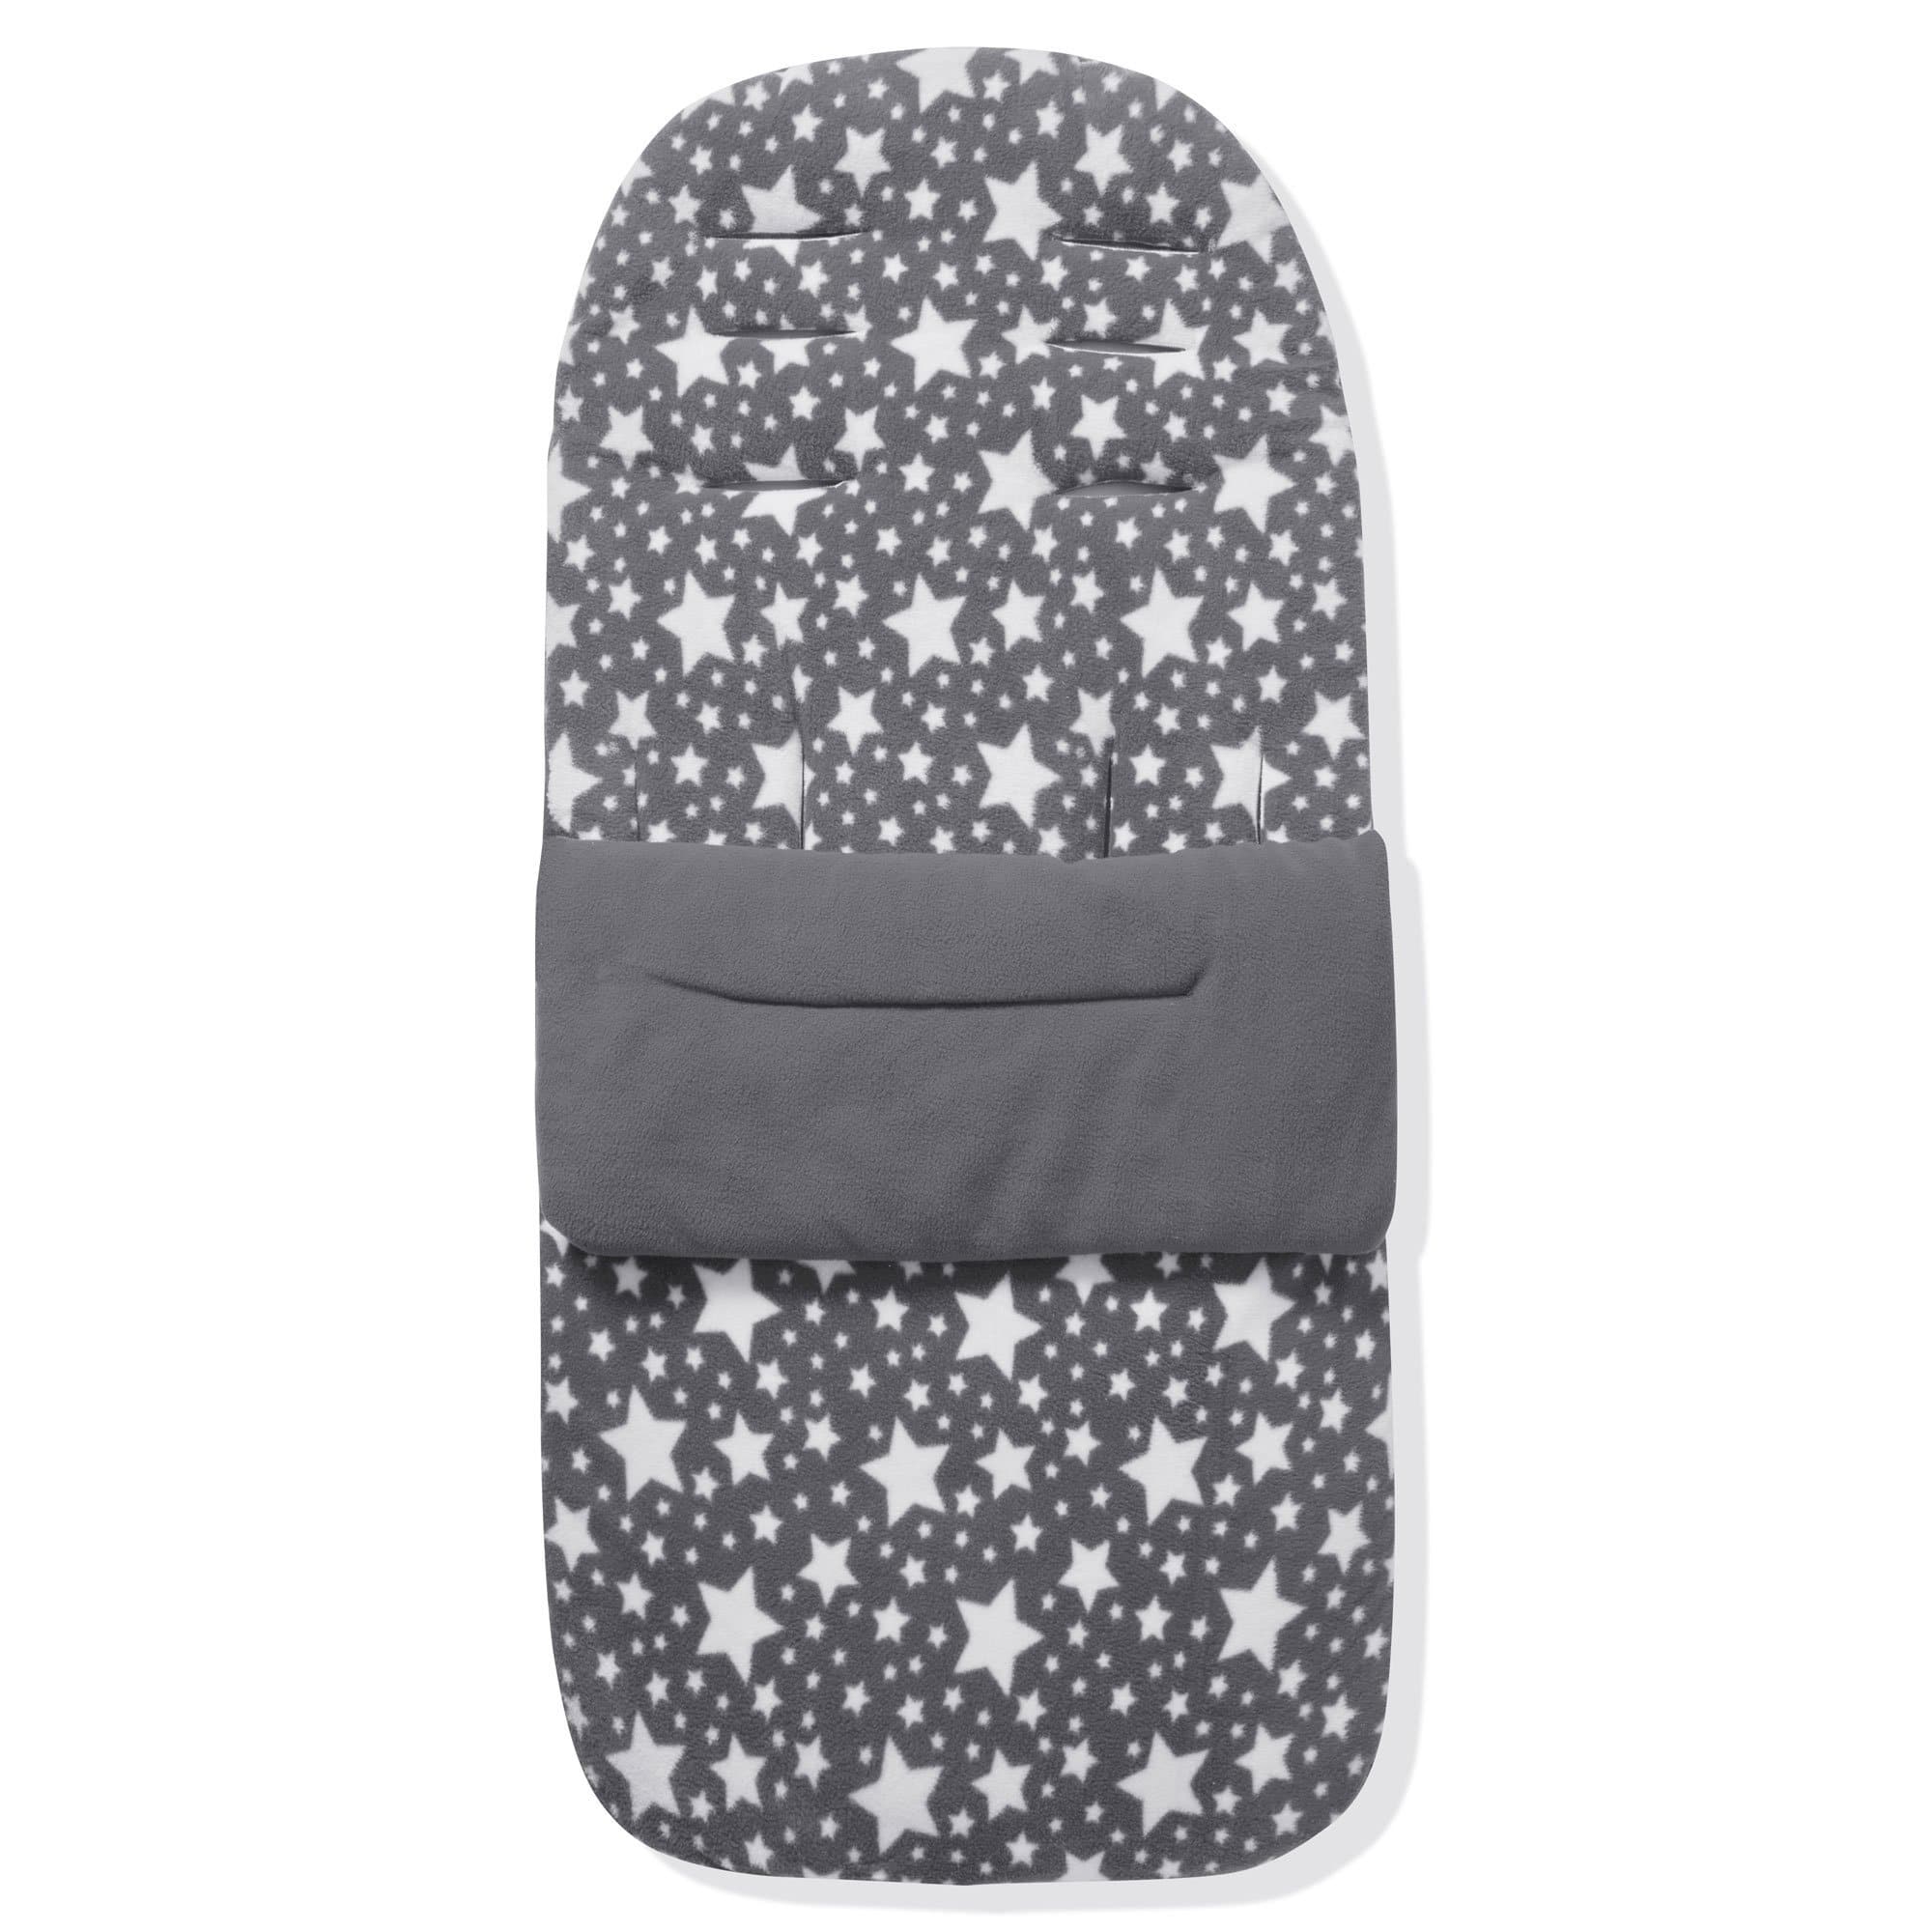 Fleece Footmuff / Cosy Toes Compatible With Baby Trend - For Your Little One